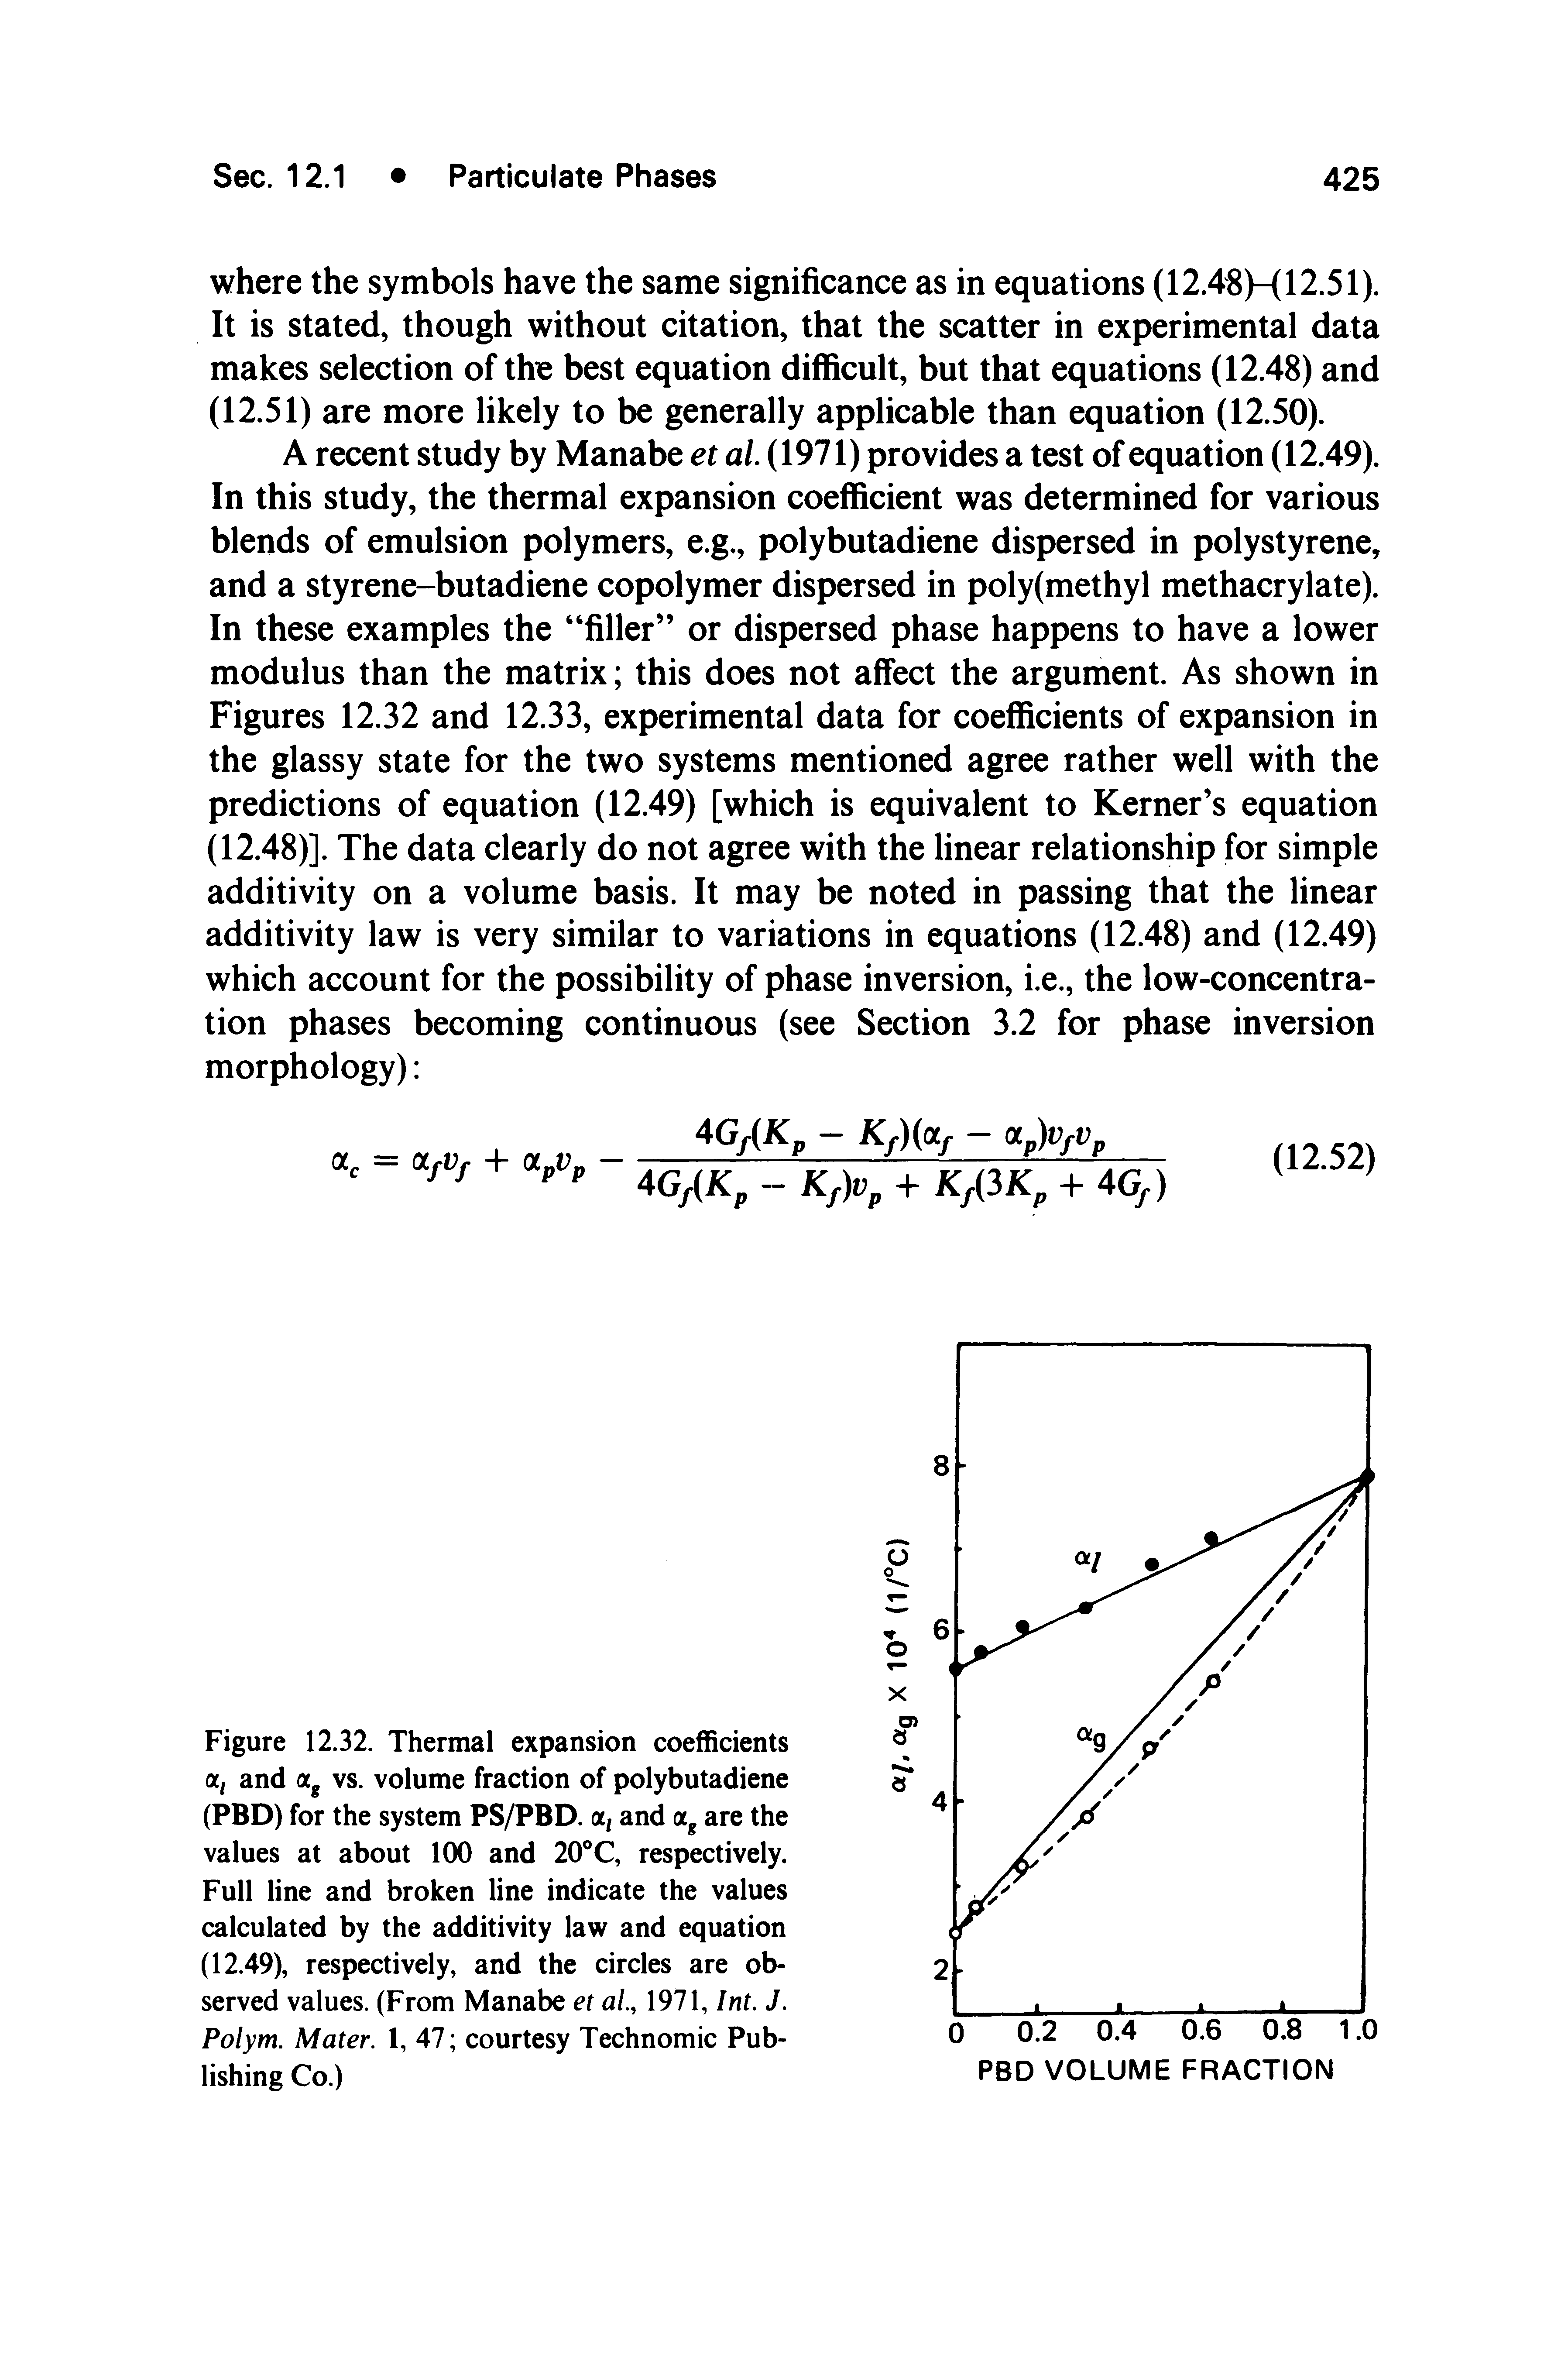 Figure 12.32. Thermal expansion coefficients OLi and (Xg vs. volume fraction of polybutadiene (PBD) for the system PS/PBD. a, and are the values at about 100 and 20°C, respectively. Full line and broken line indicate the values calculated by the additivity law and equation (12.49), respectively, and the circles are observed values. (From Manabe et al, 1971, Int. J. Polym. Mater. 1, 47 courtesy Technomic Publishing Co.)...